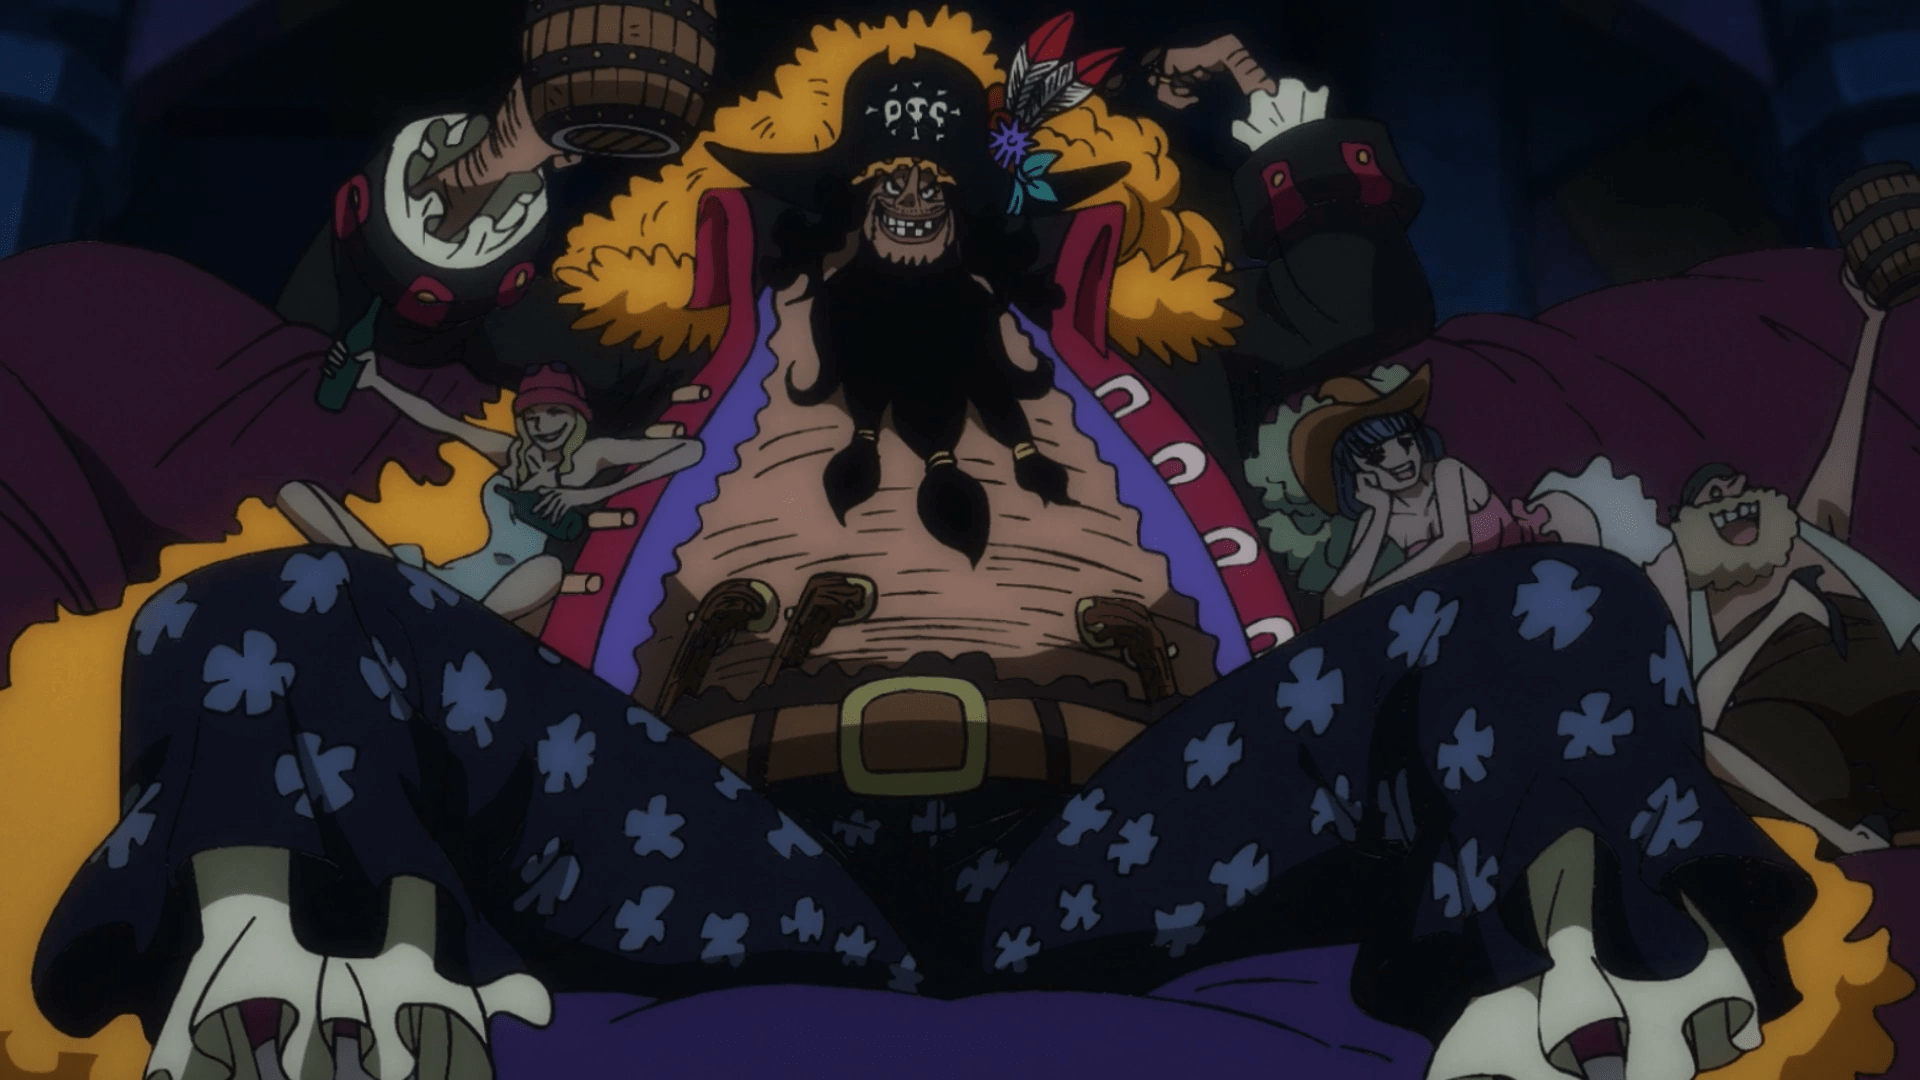 Could Freddy Krueger Defeat These Anime Heroes?